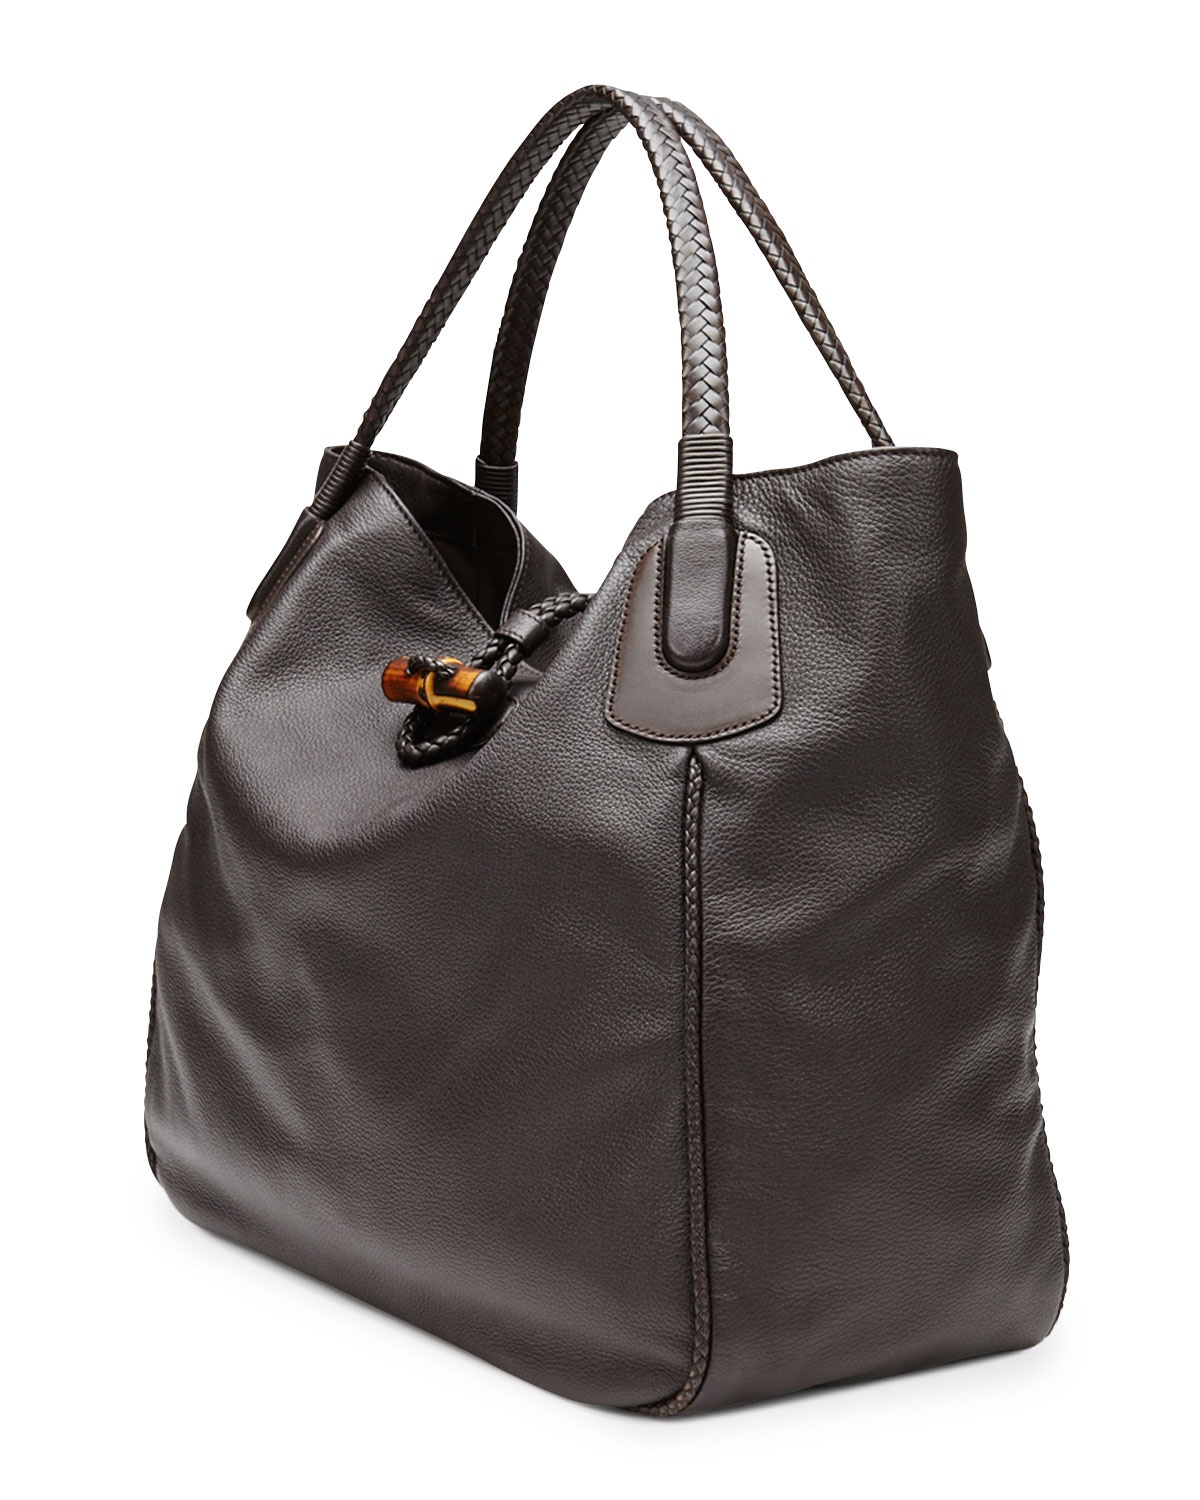 Gucci Hip Bamboo Leather Tote Bag in Dark Brown (Brown) - Lyst